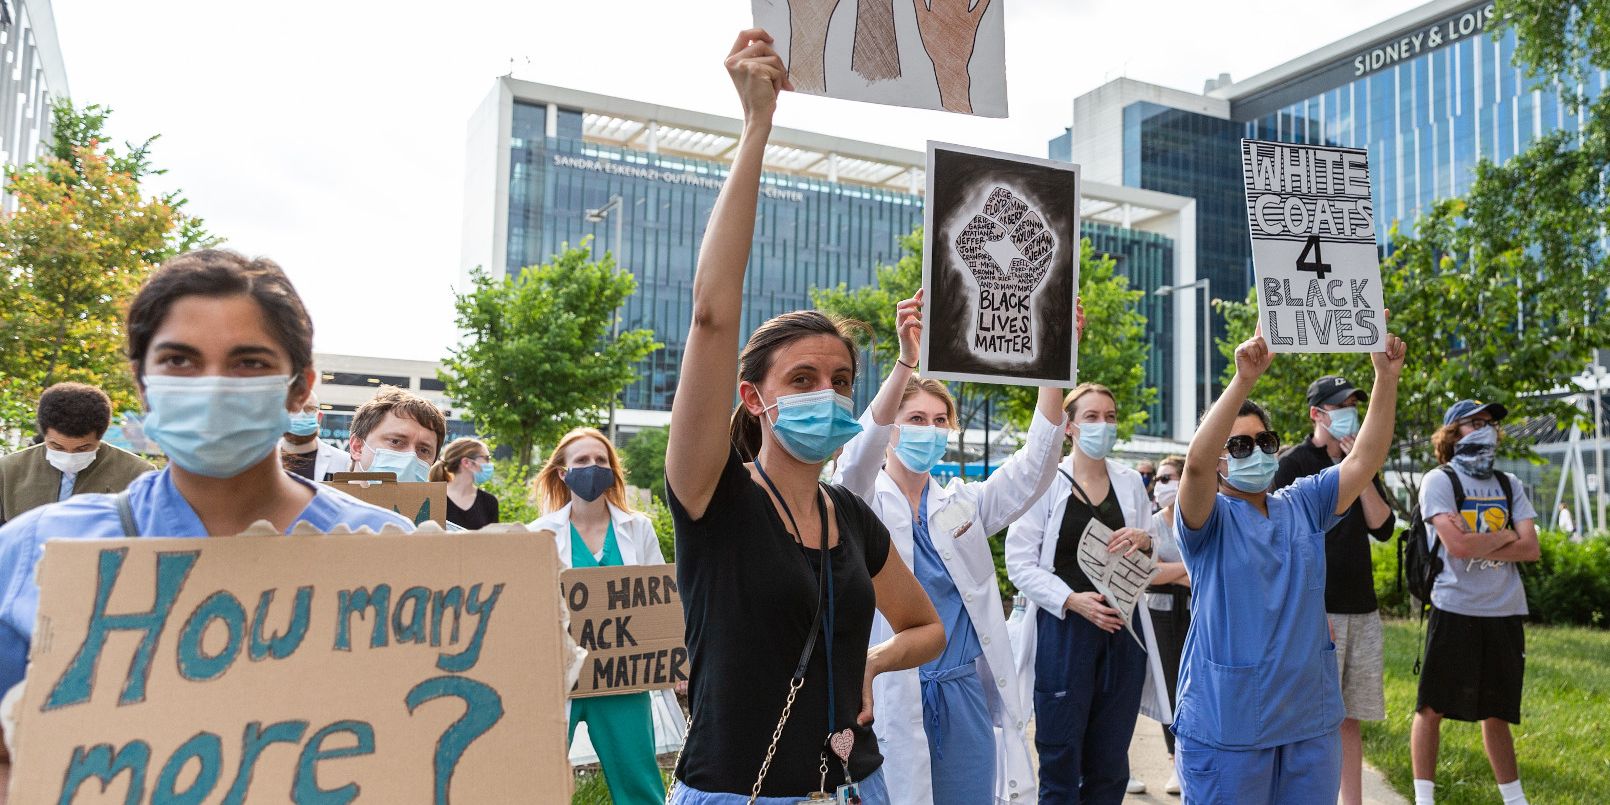 A collection of people wearing masks are standing holding signs